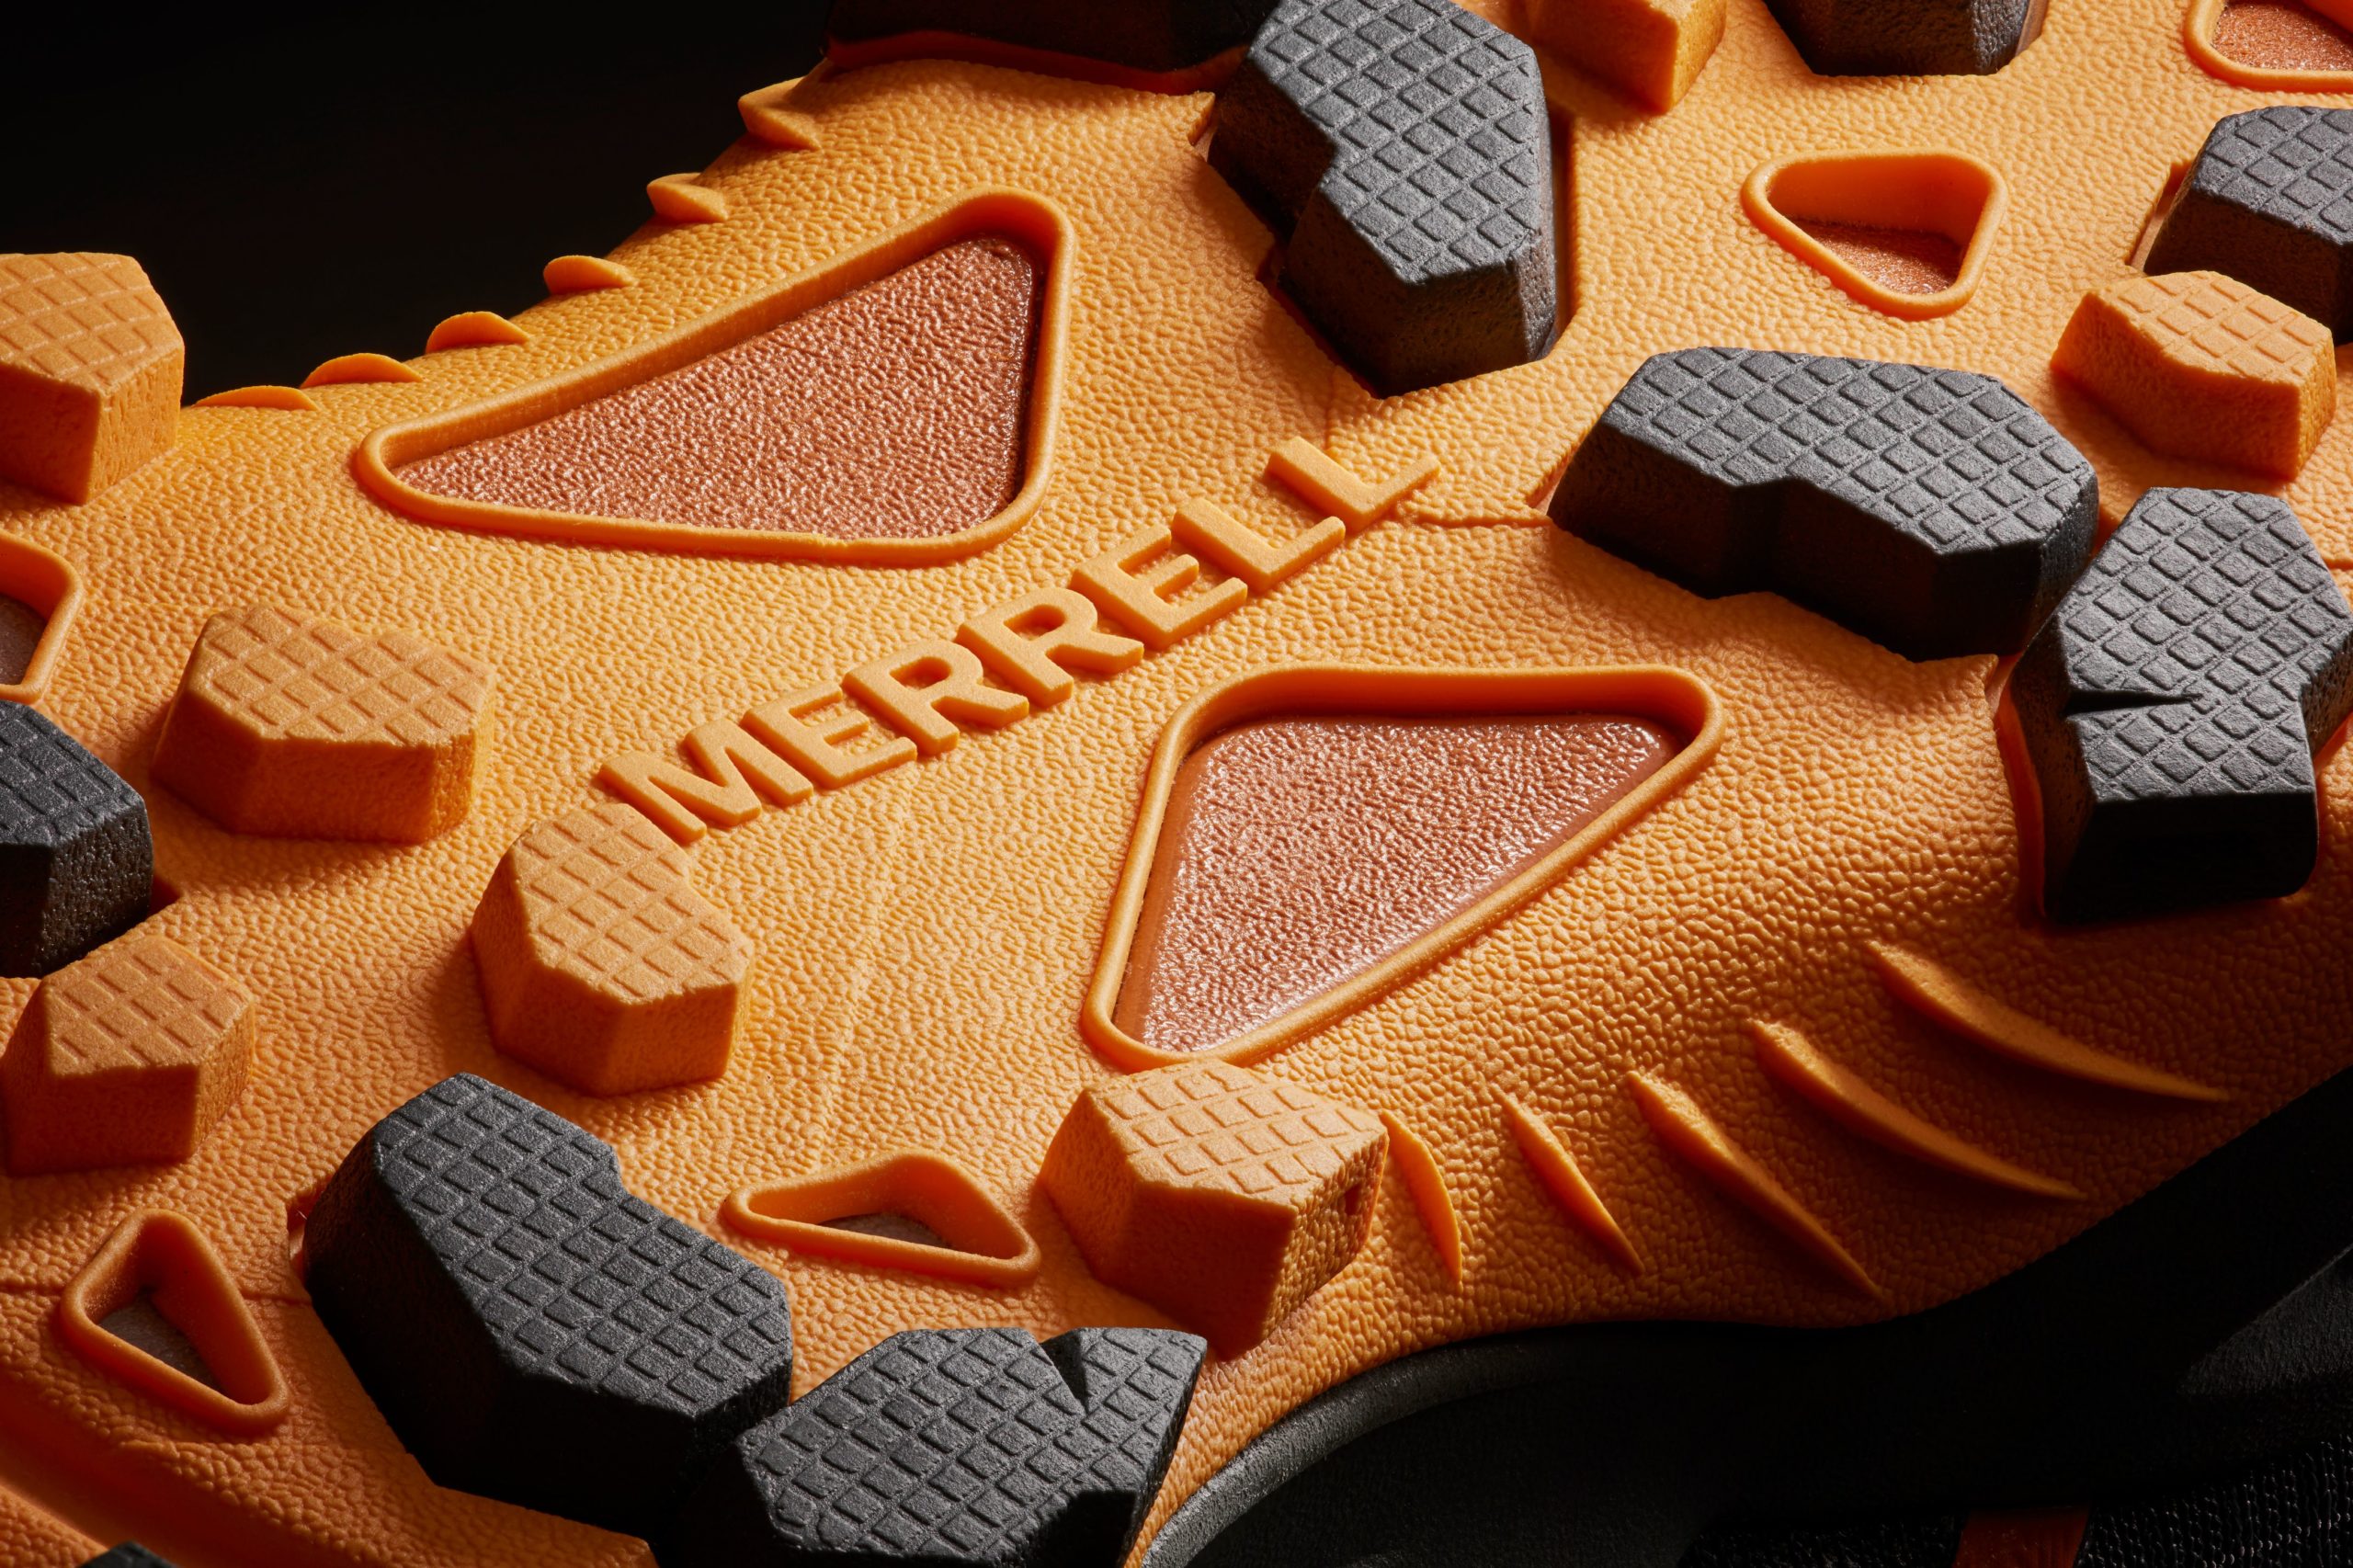 Merrell Discount for Workers on the Front Lines